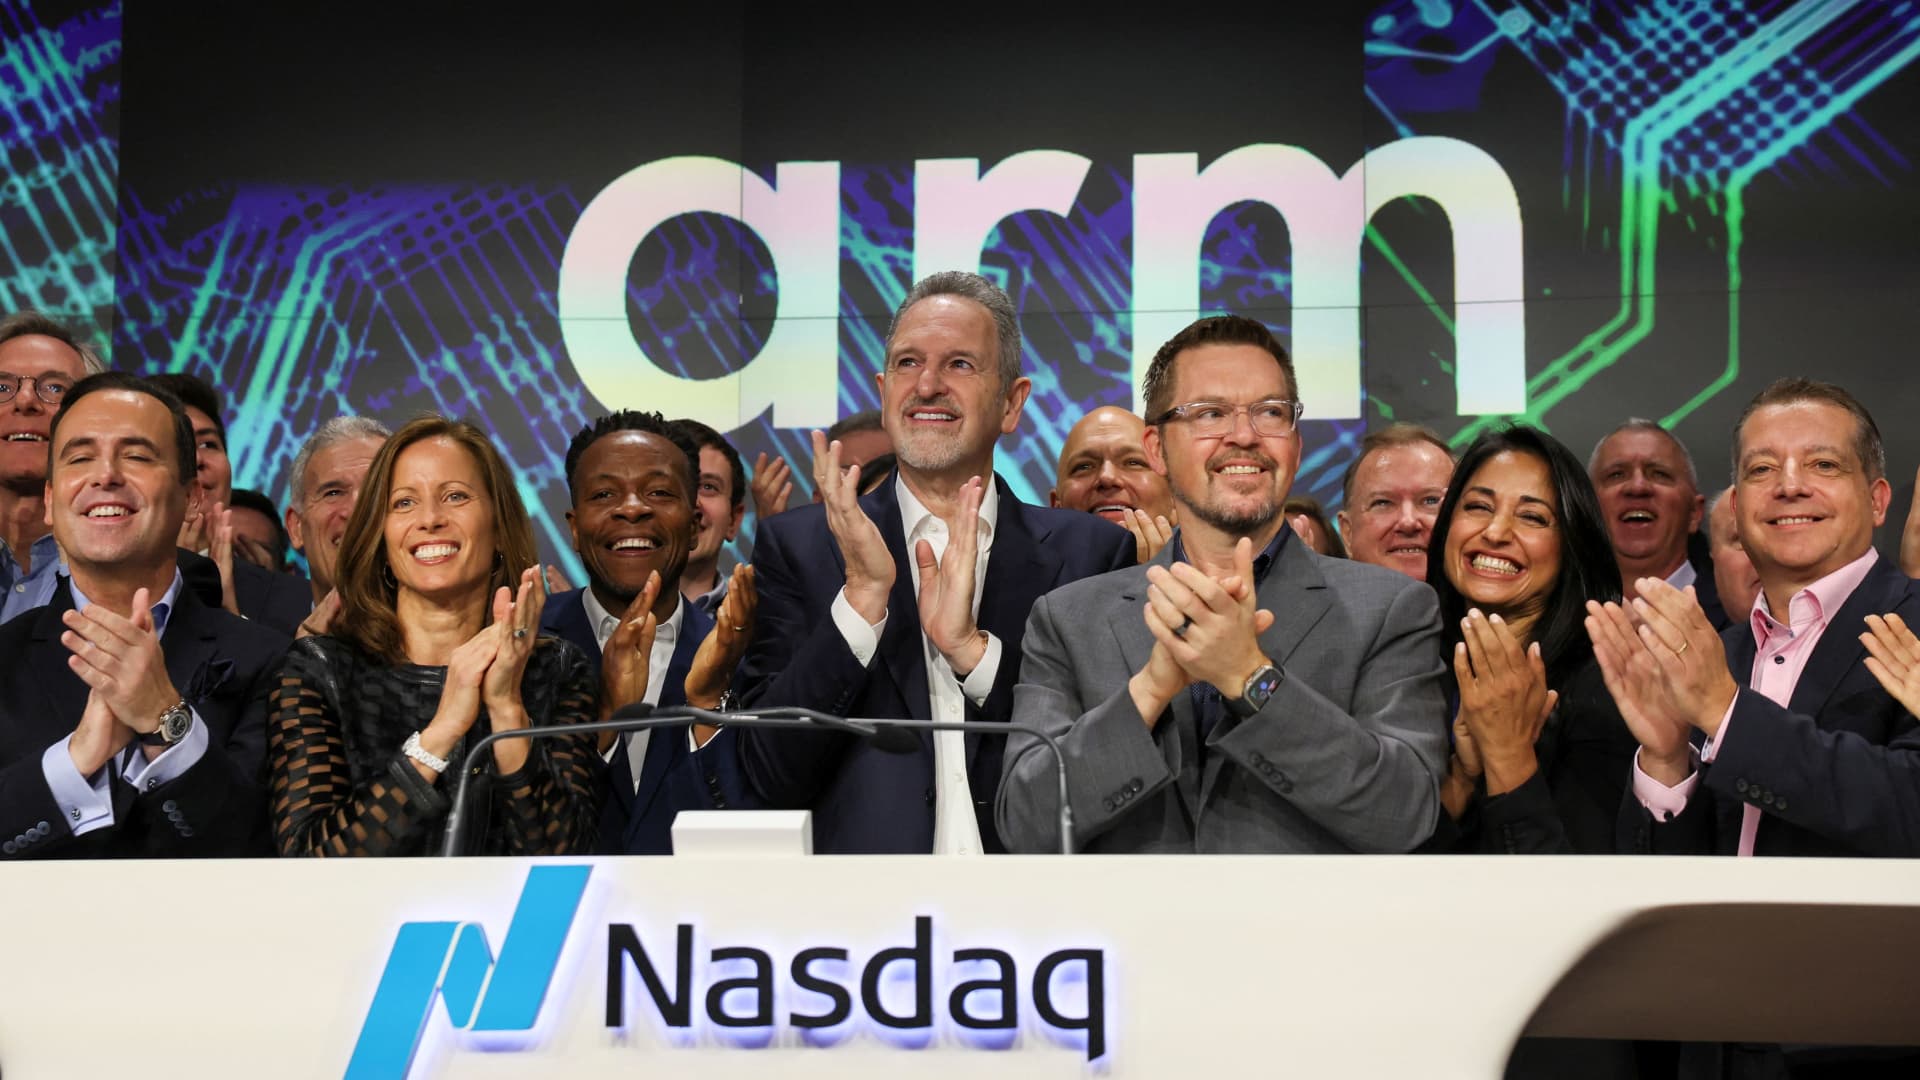 Arm’s second trading day is more subdued, but valuation still tops $60 billion